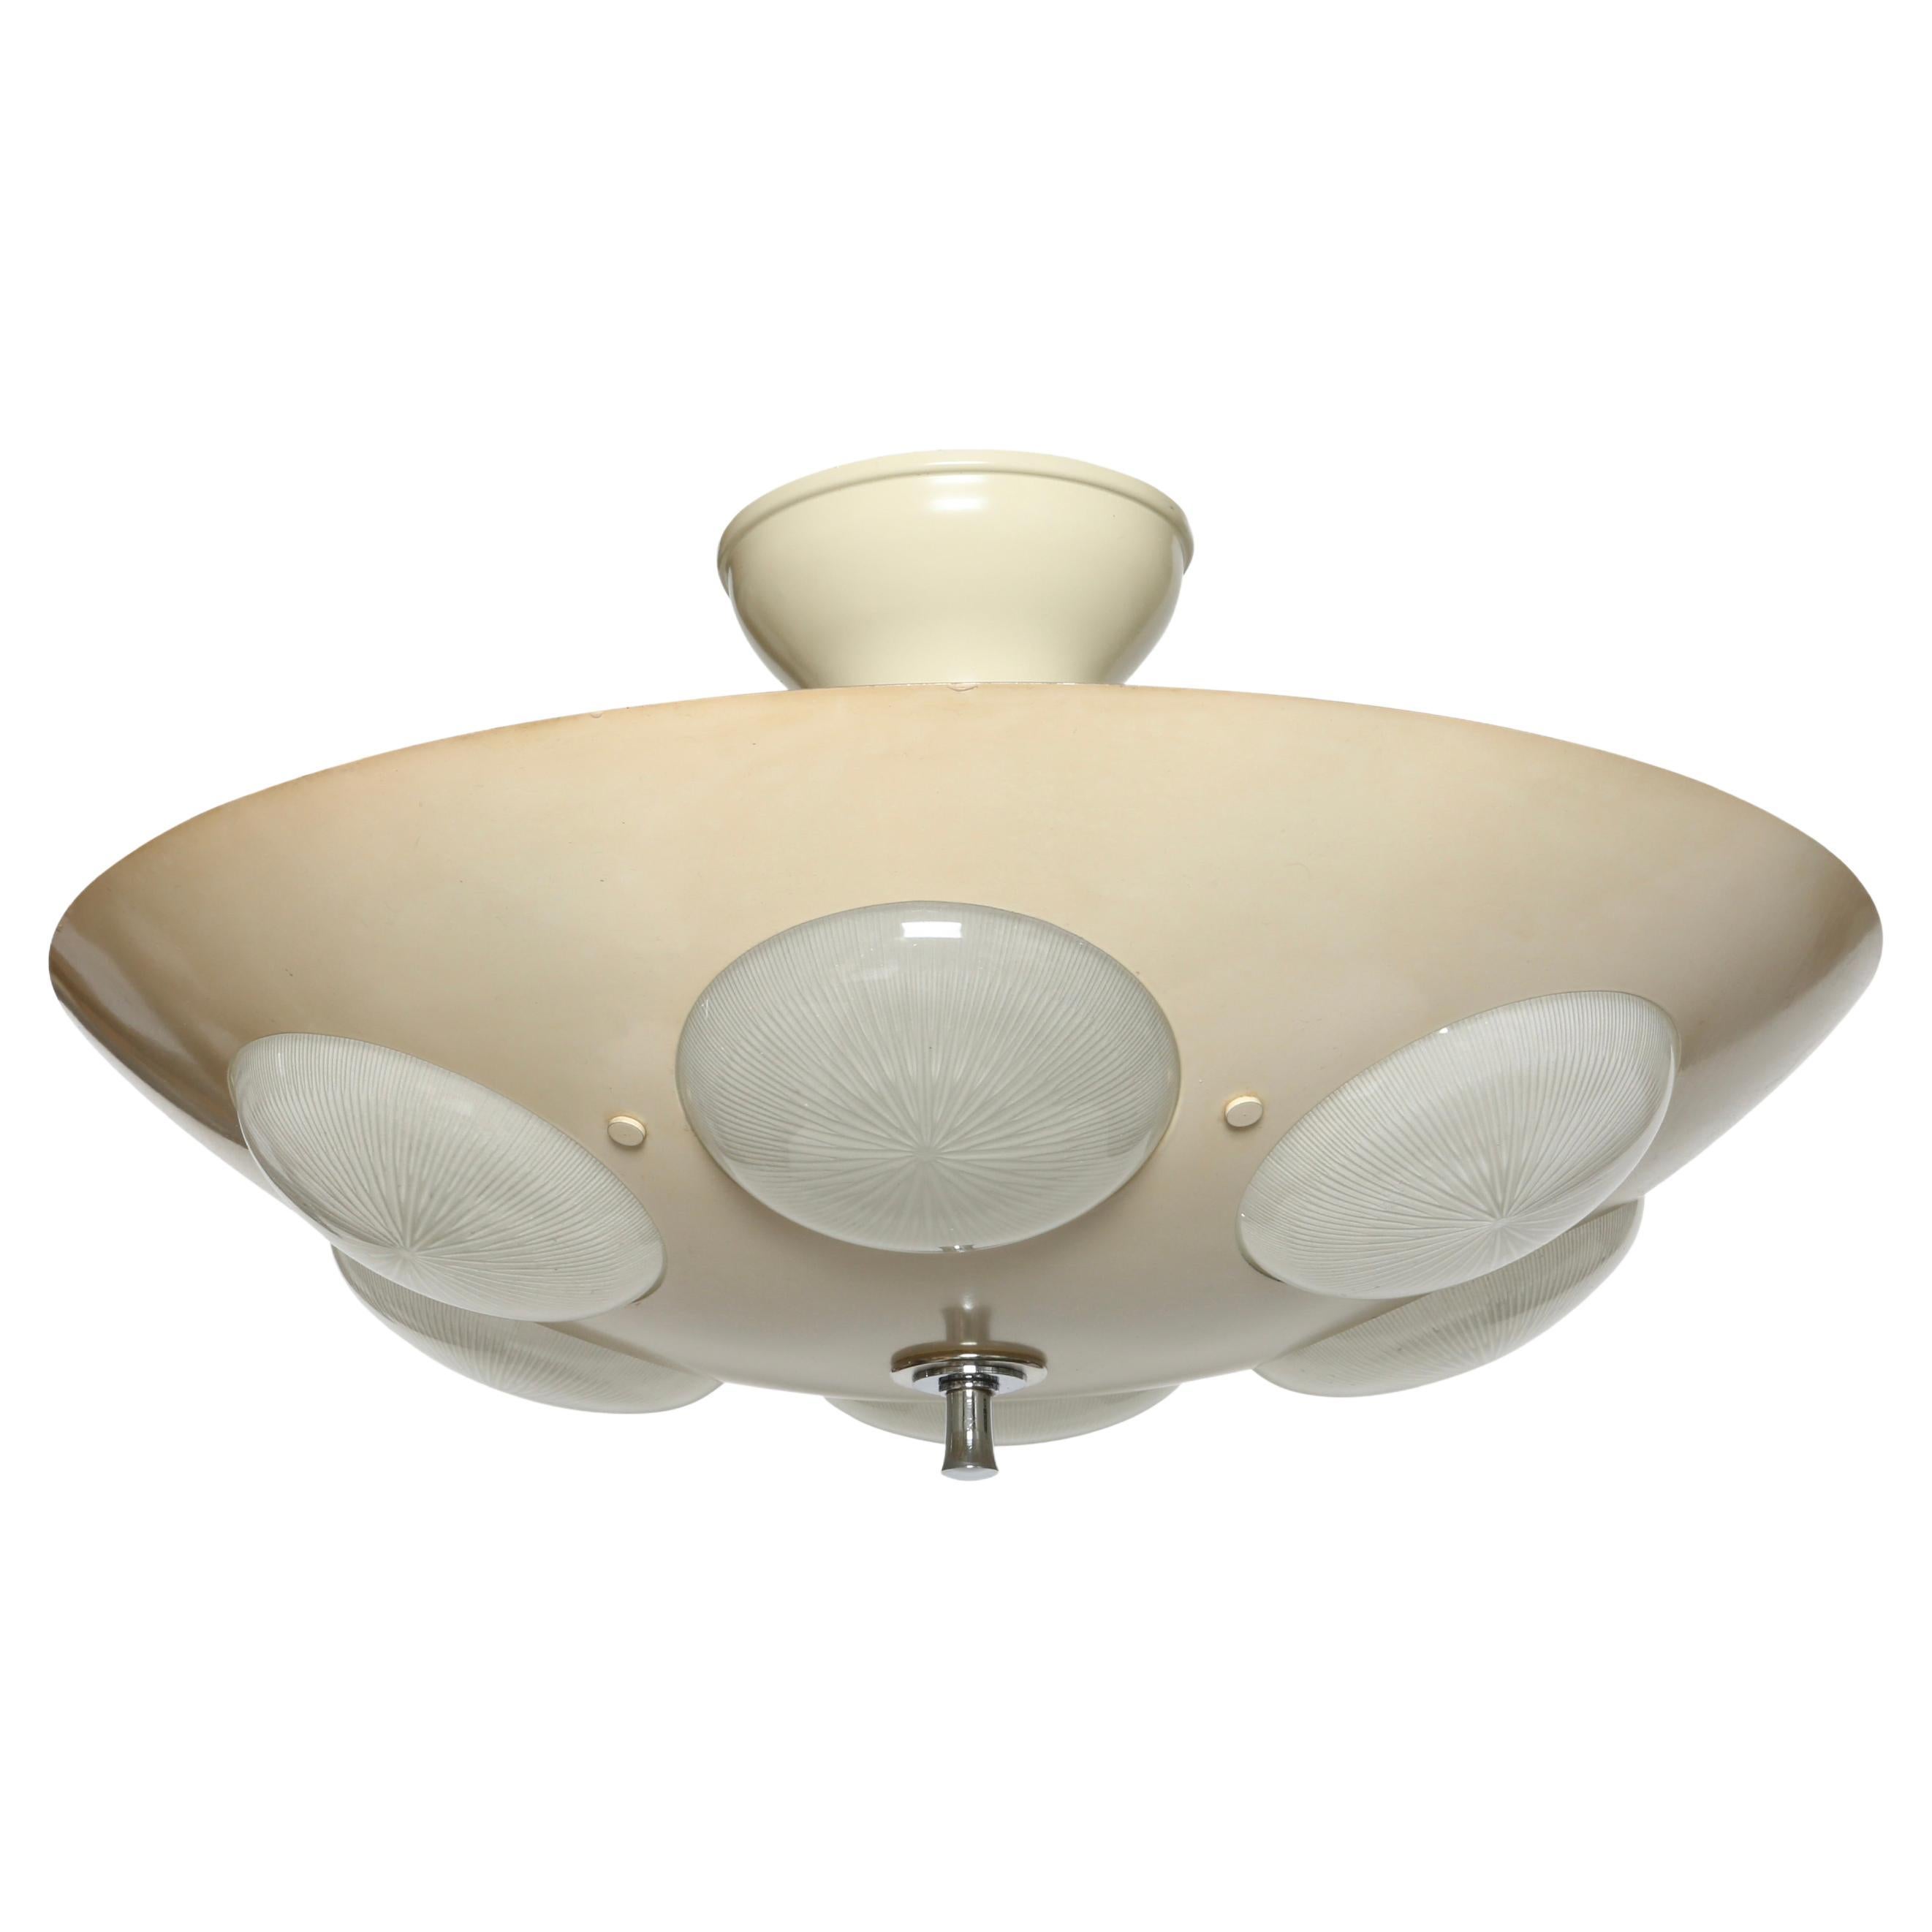 Oscar Torlasco for Lumi attributed ceiling suspension For Sale